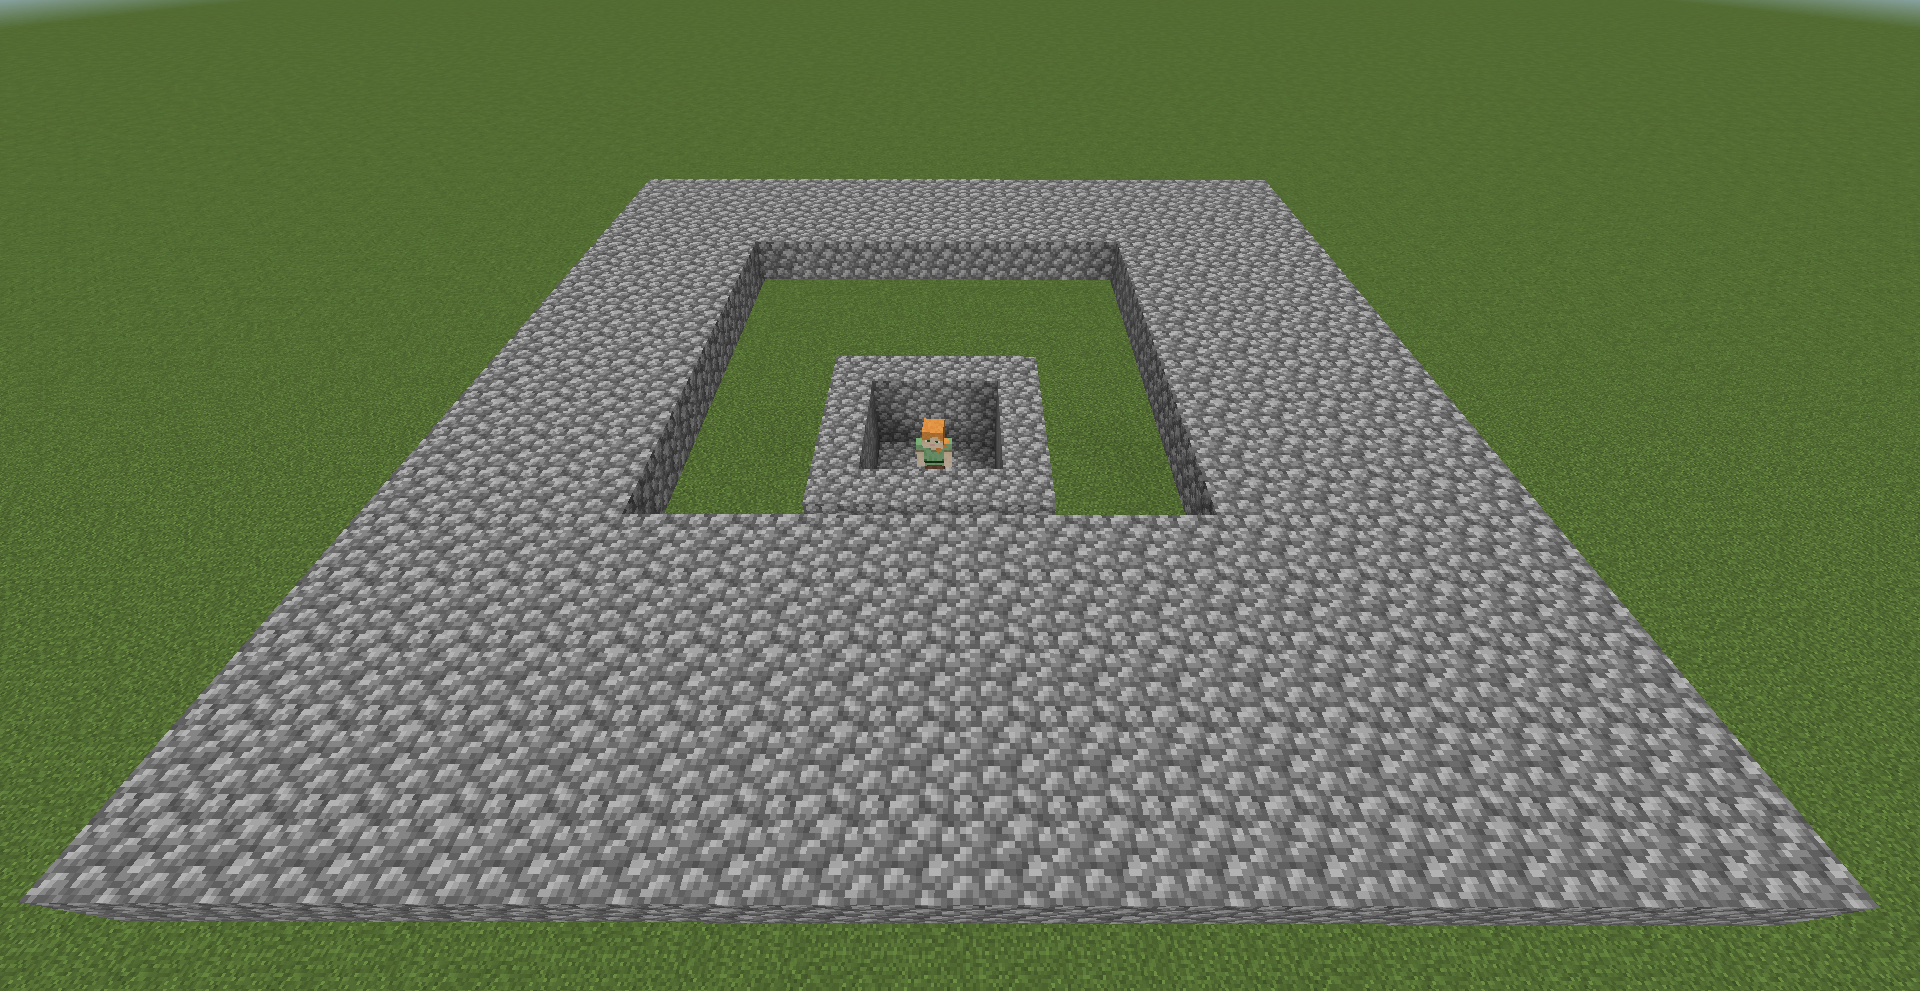 Platform for the villager with visible bot cage